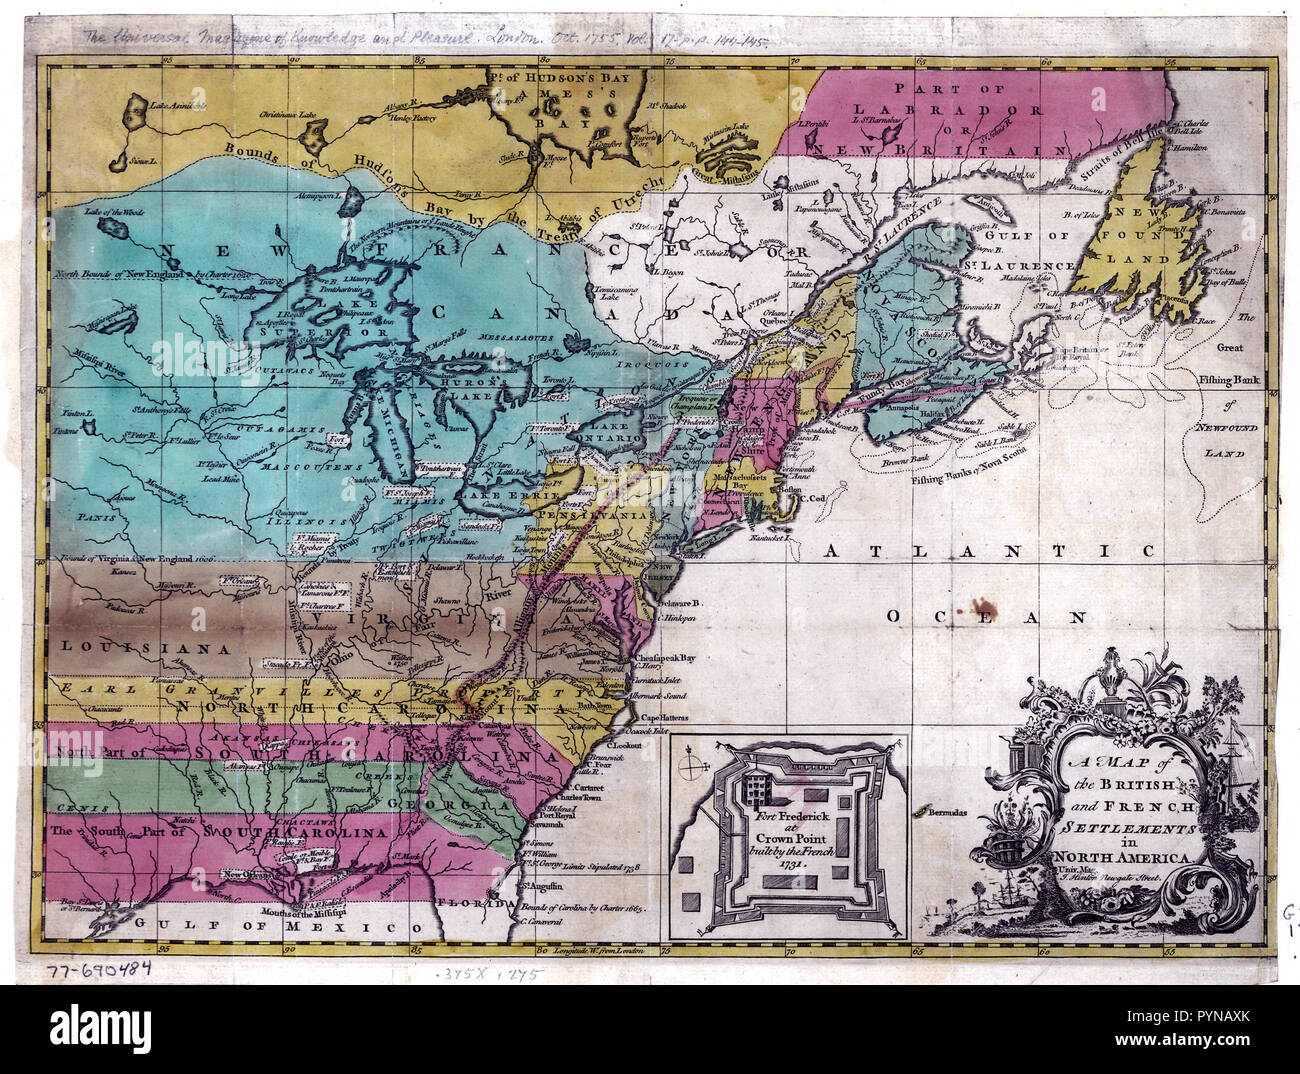 Vintage Maps / Antique Maps - A Map of the British and French settlements in North America ca. 1755 Stock Photo